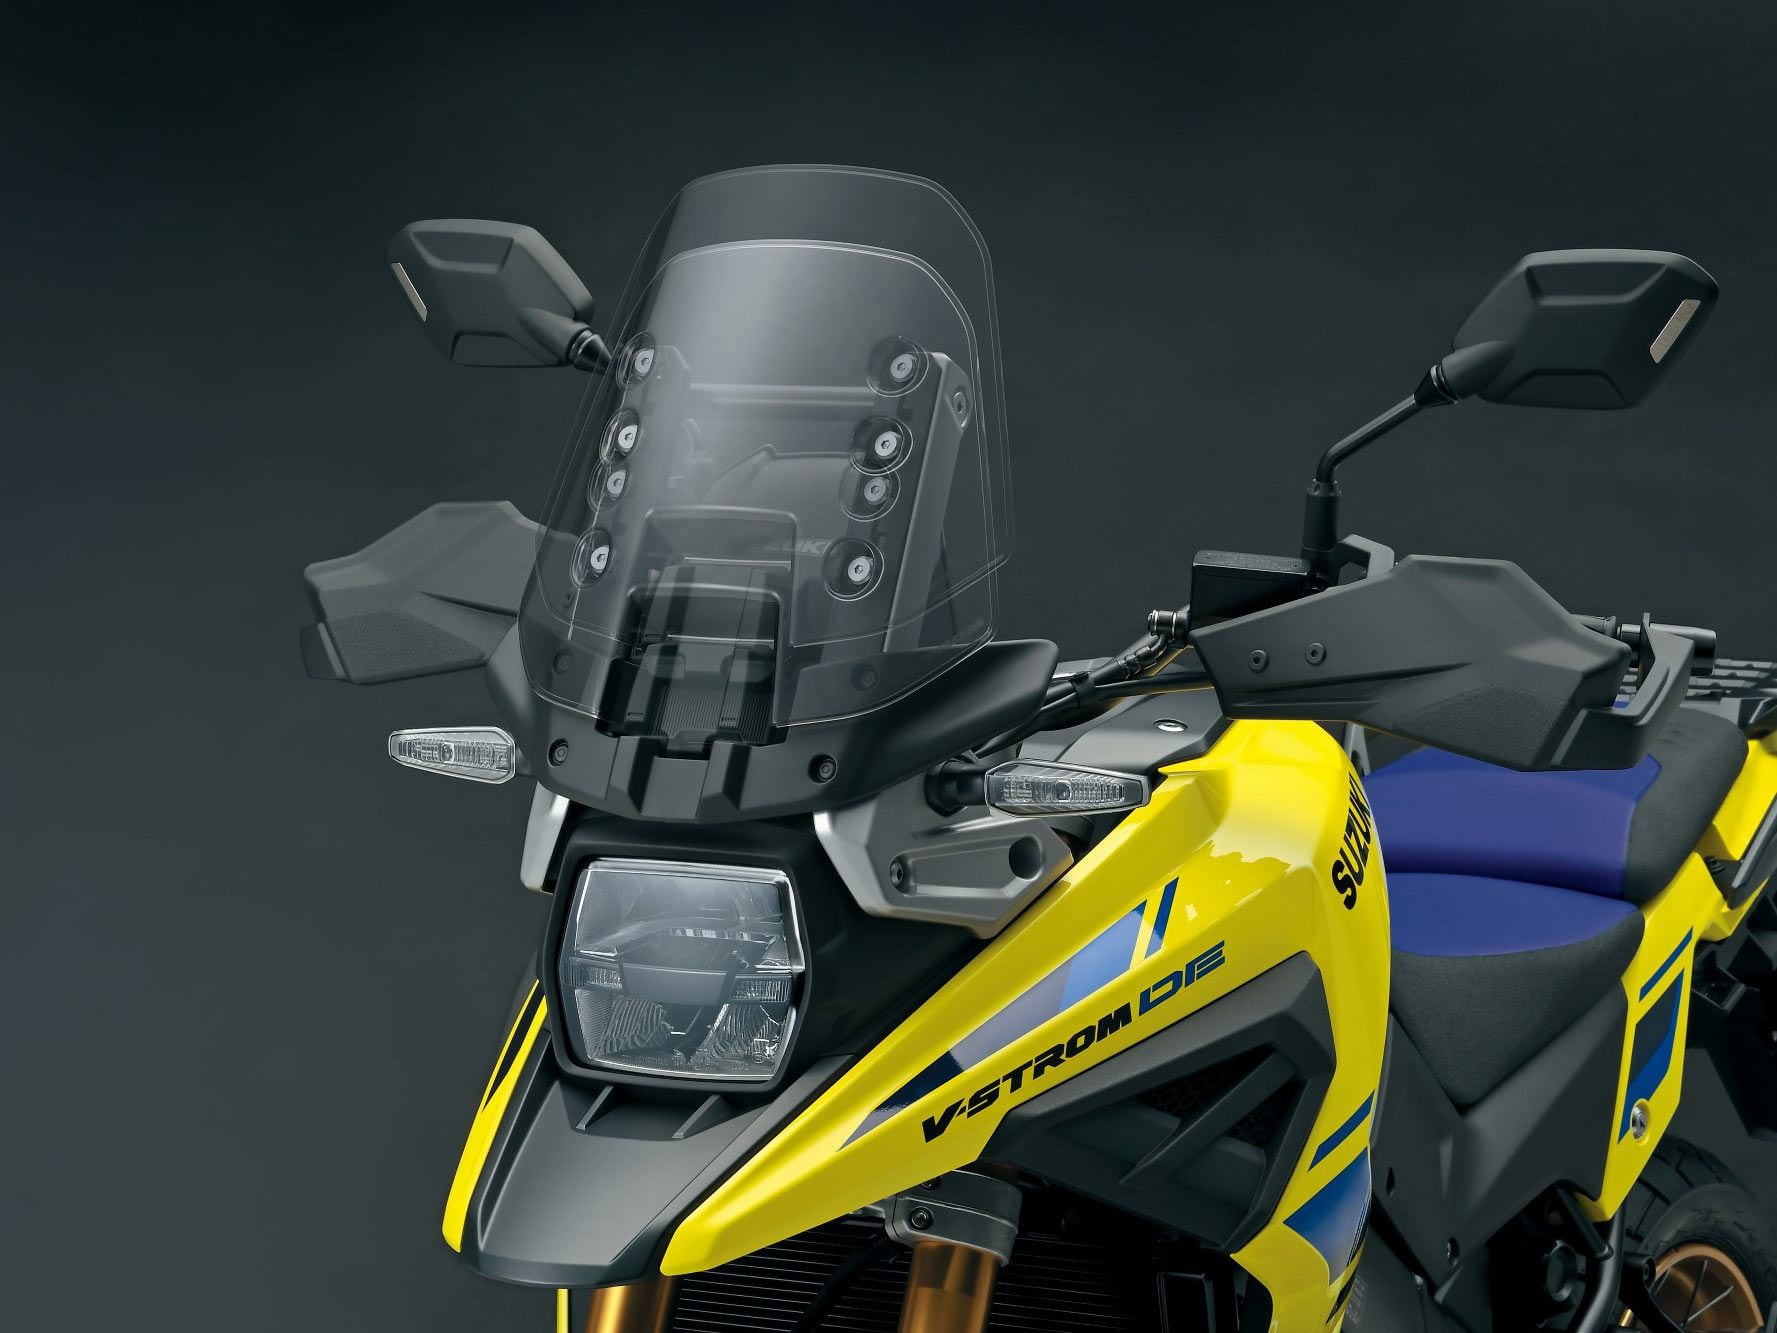 A shorter but adjustable windscreen is optimized for off-road riding.